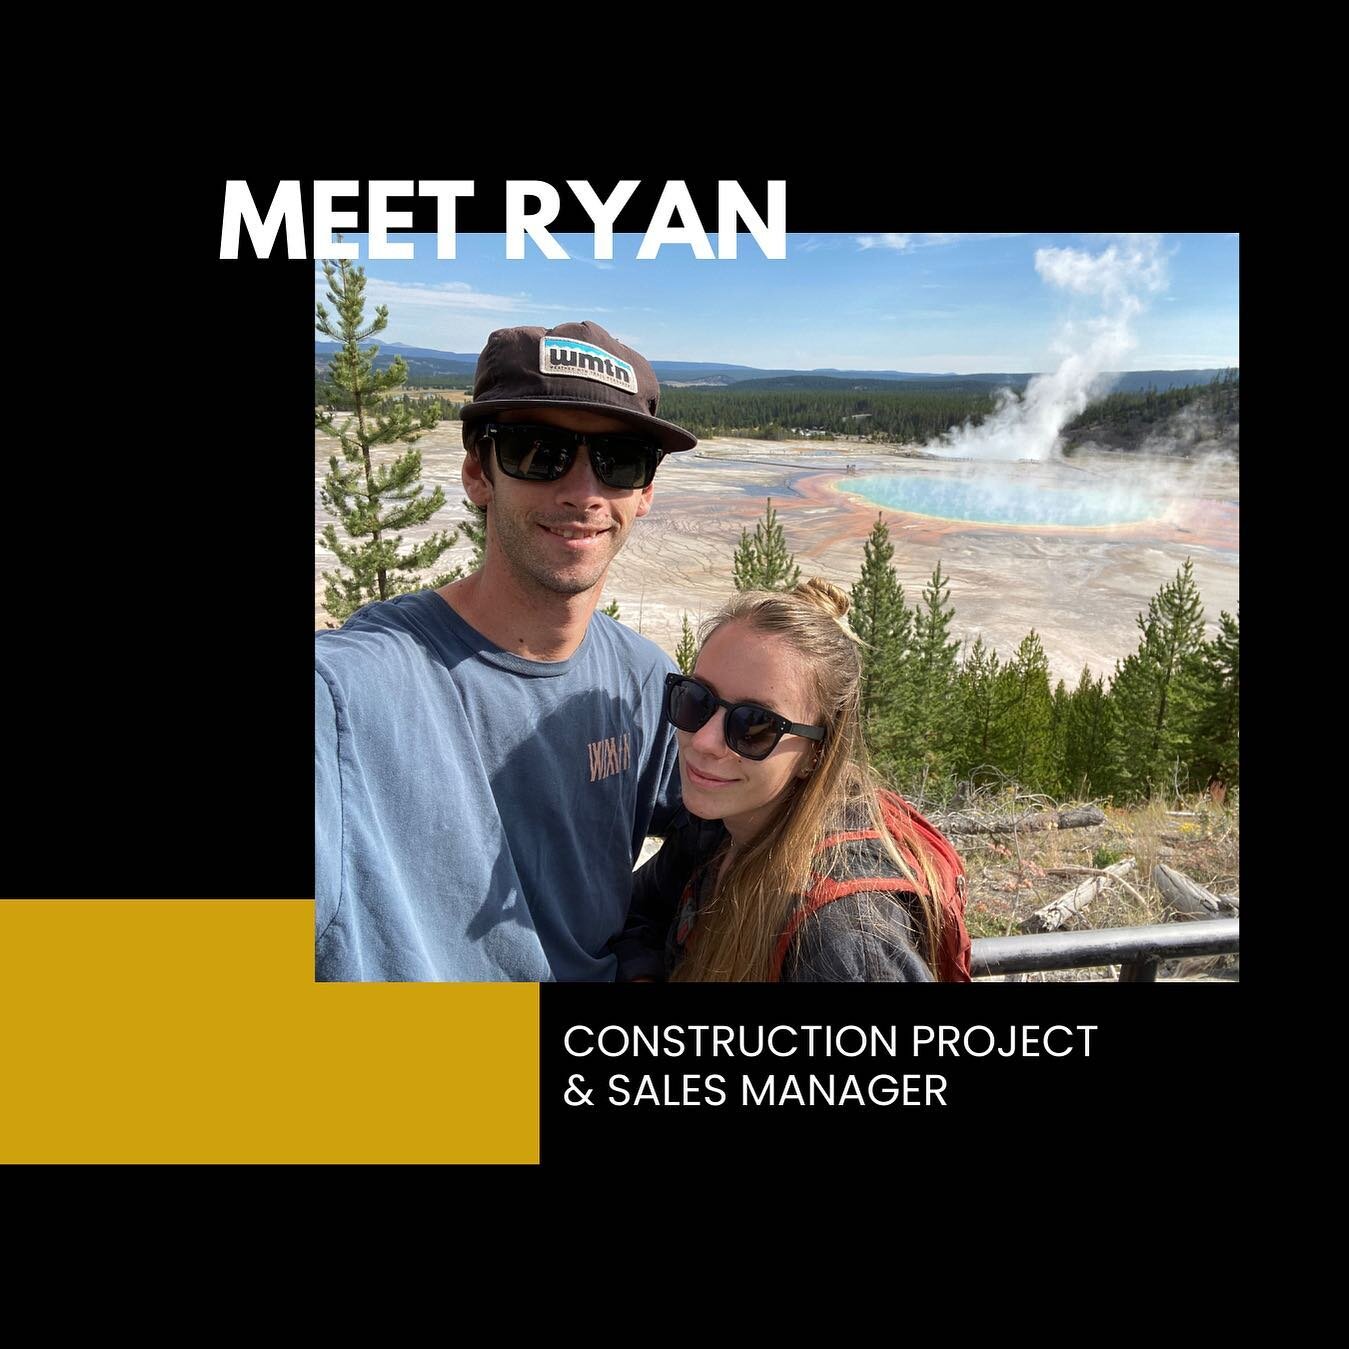 Meet Ryan Wolverton, our rockstar Construction Project/Sales Manager at Copp Roofing! Ryan's passion for adventure shines through in his free time, whether he's snowboarding, surfing, skateboarding, or backpacking. He's also a talented artist, with s